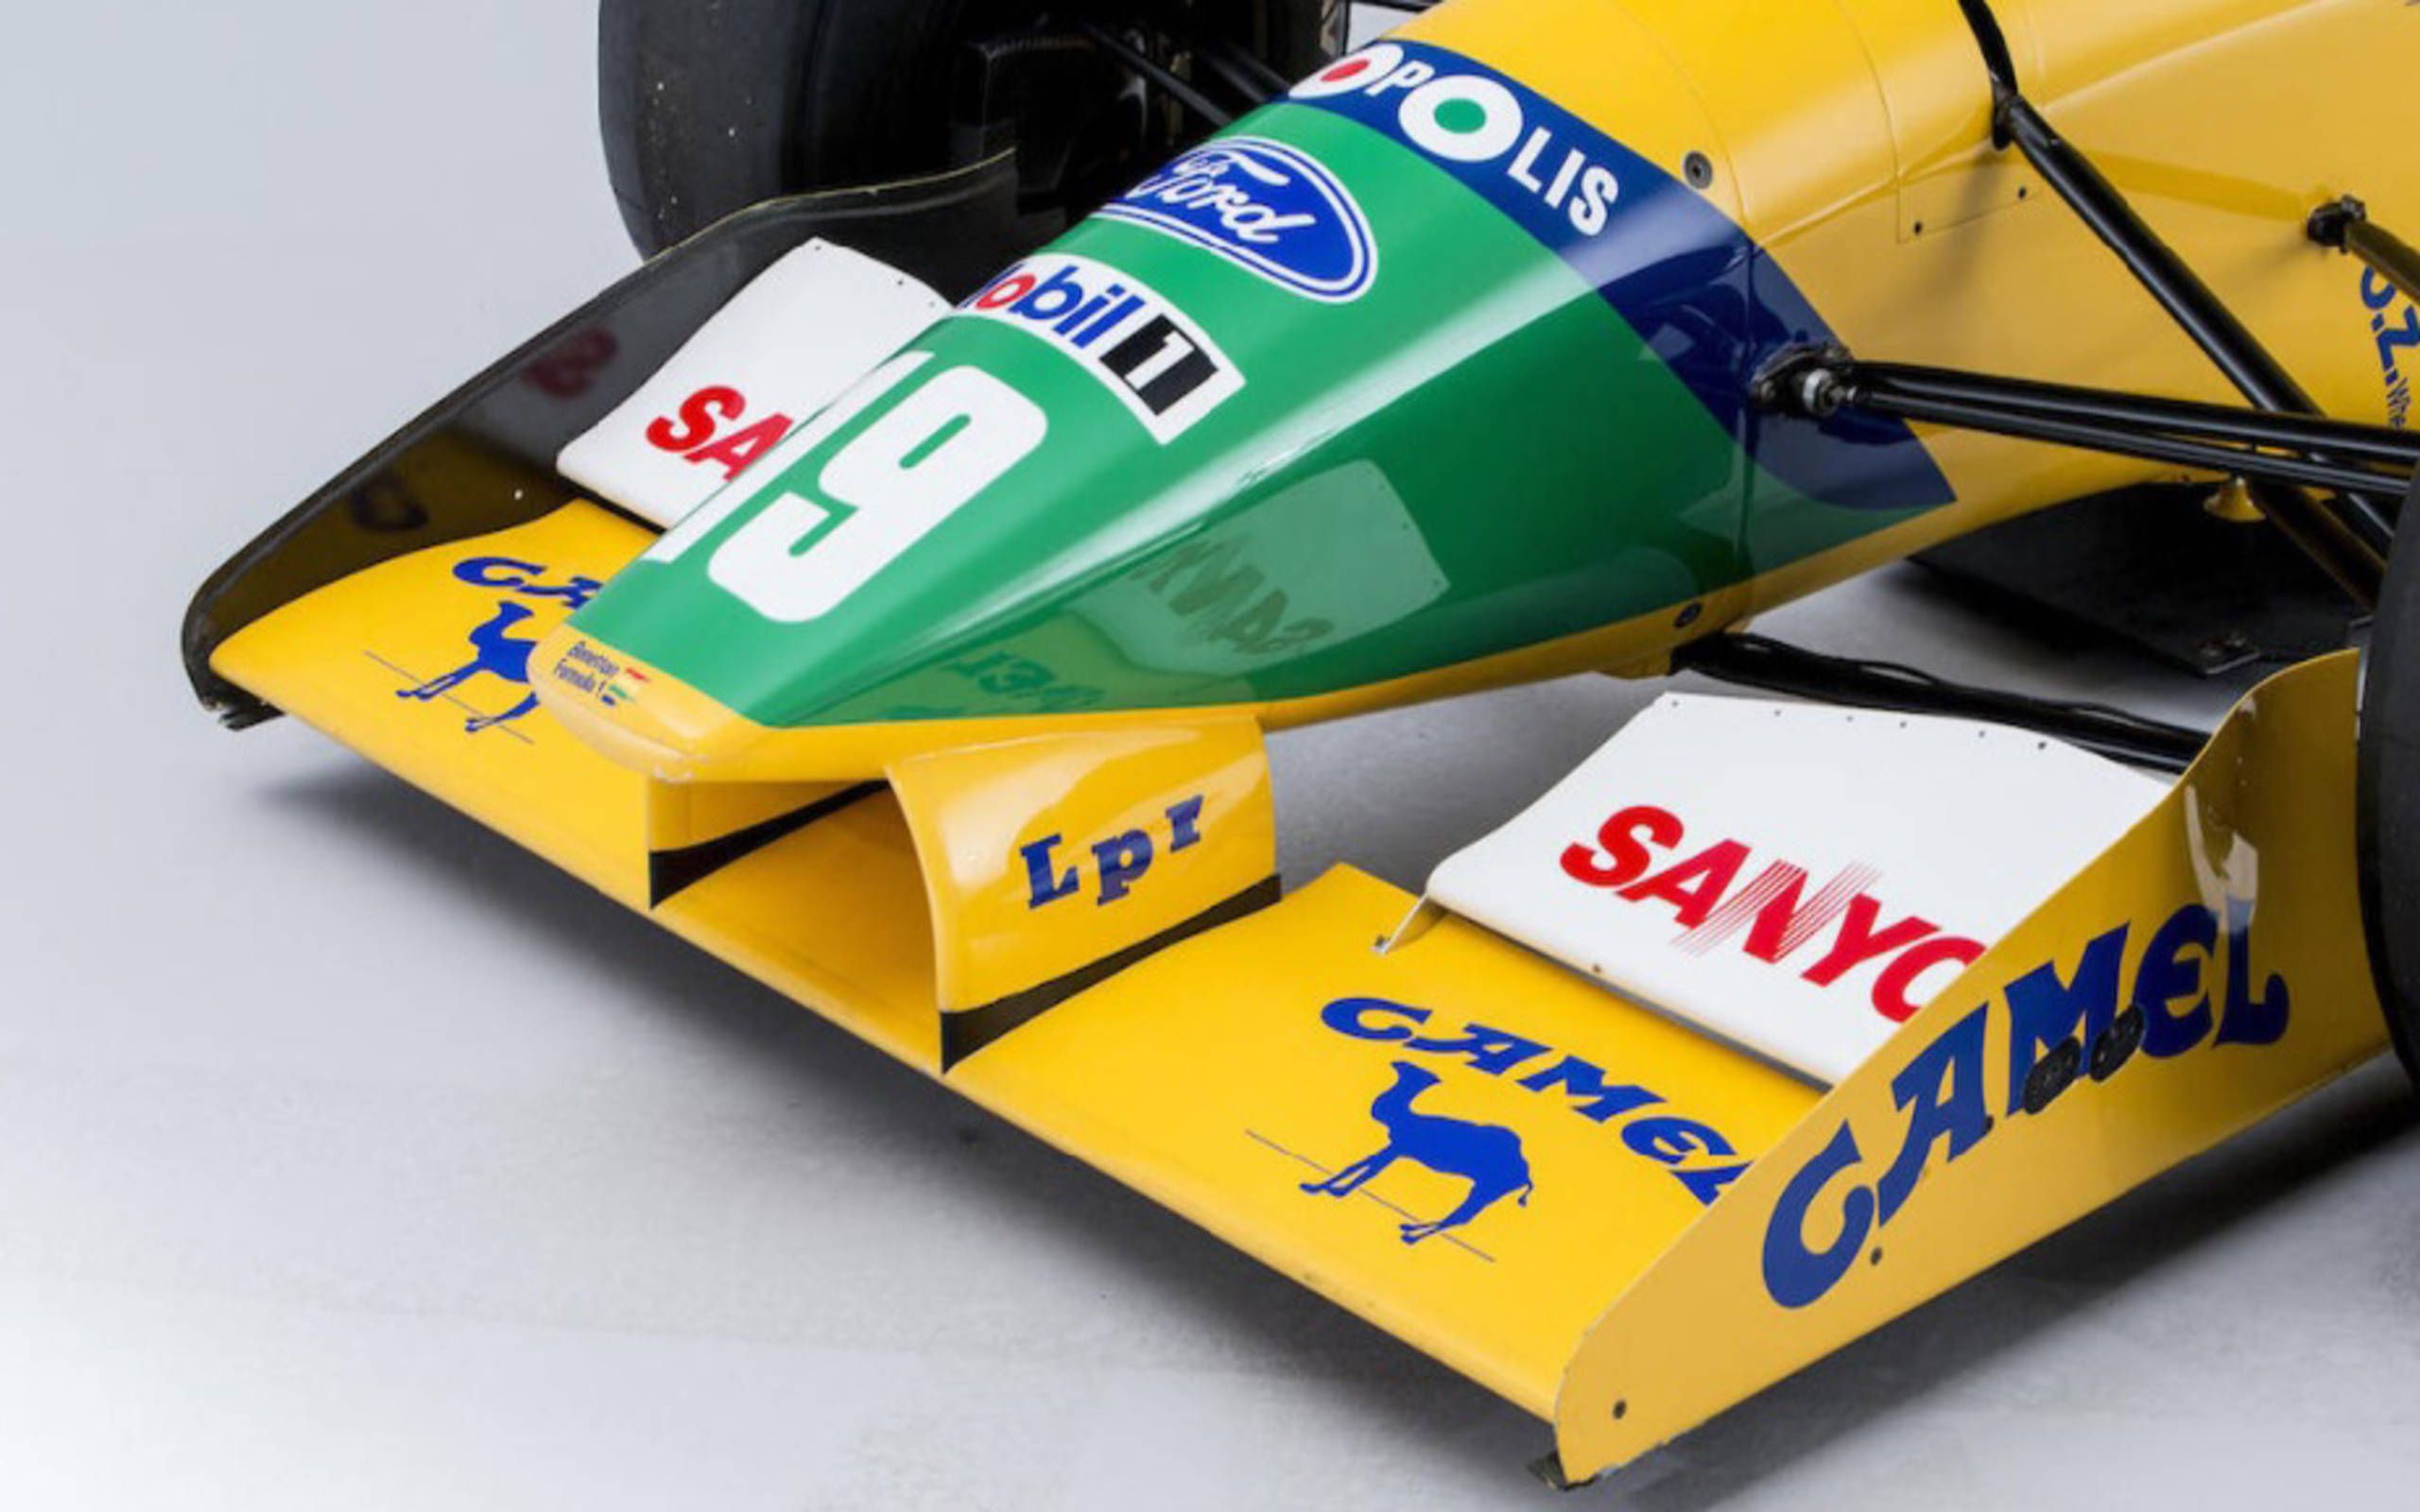 Michael Schumacher S Benetton Ford F1 Ride Heads To Auction In Monaco